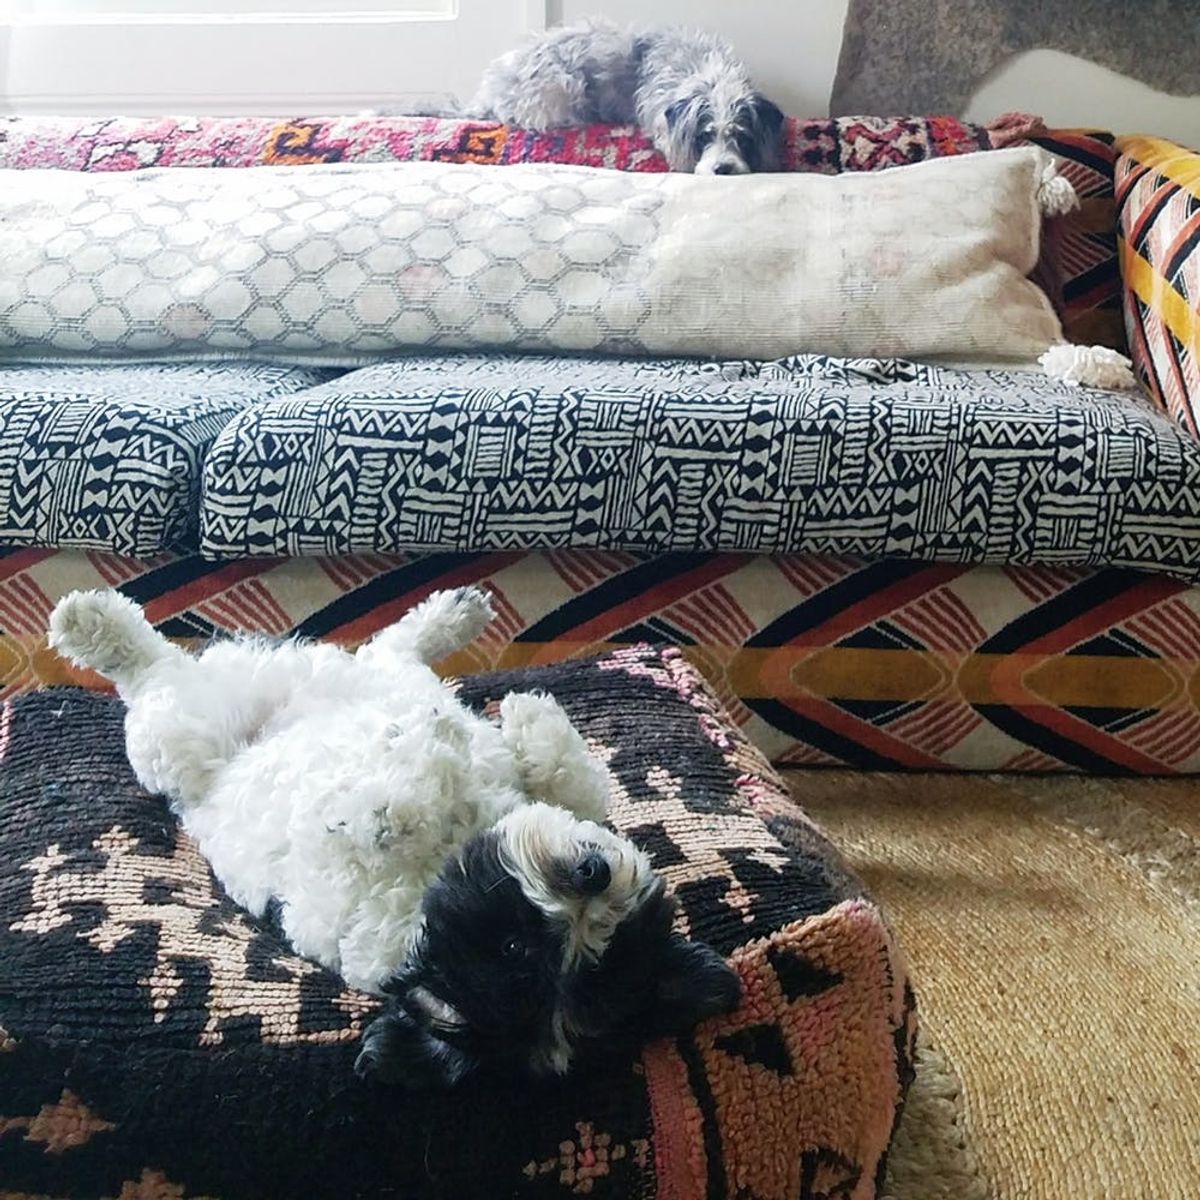 How Pet-Loving Home Decor Pros Really Keep Their Place Photo-Ready